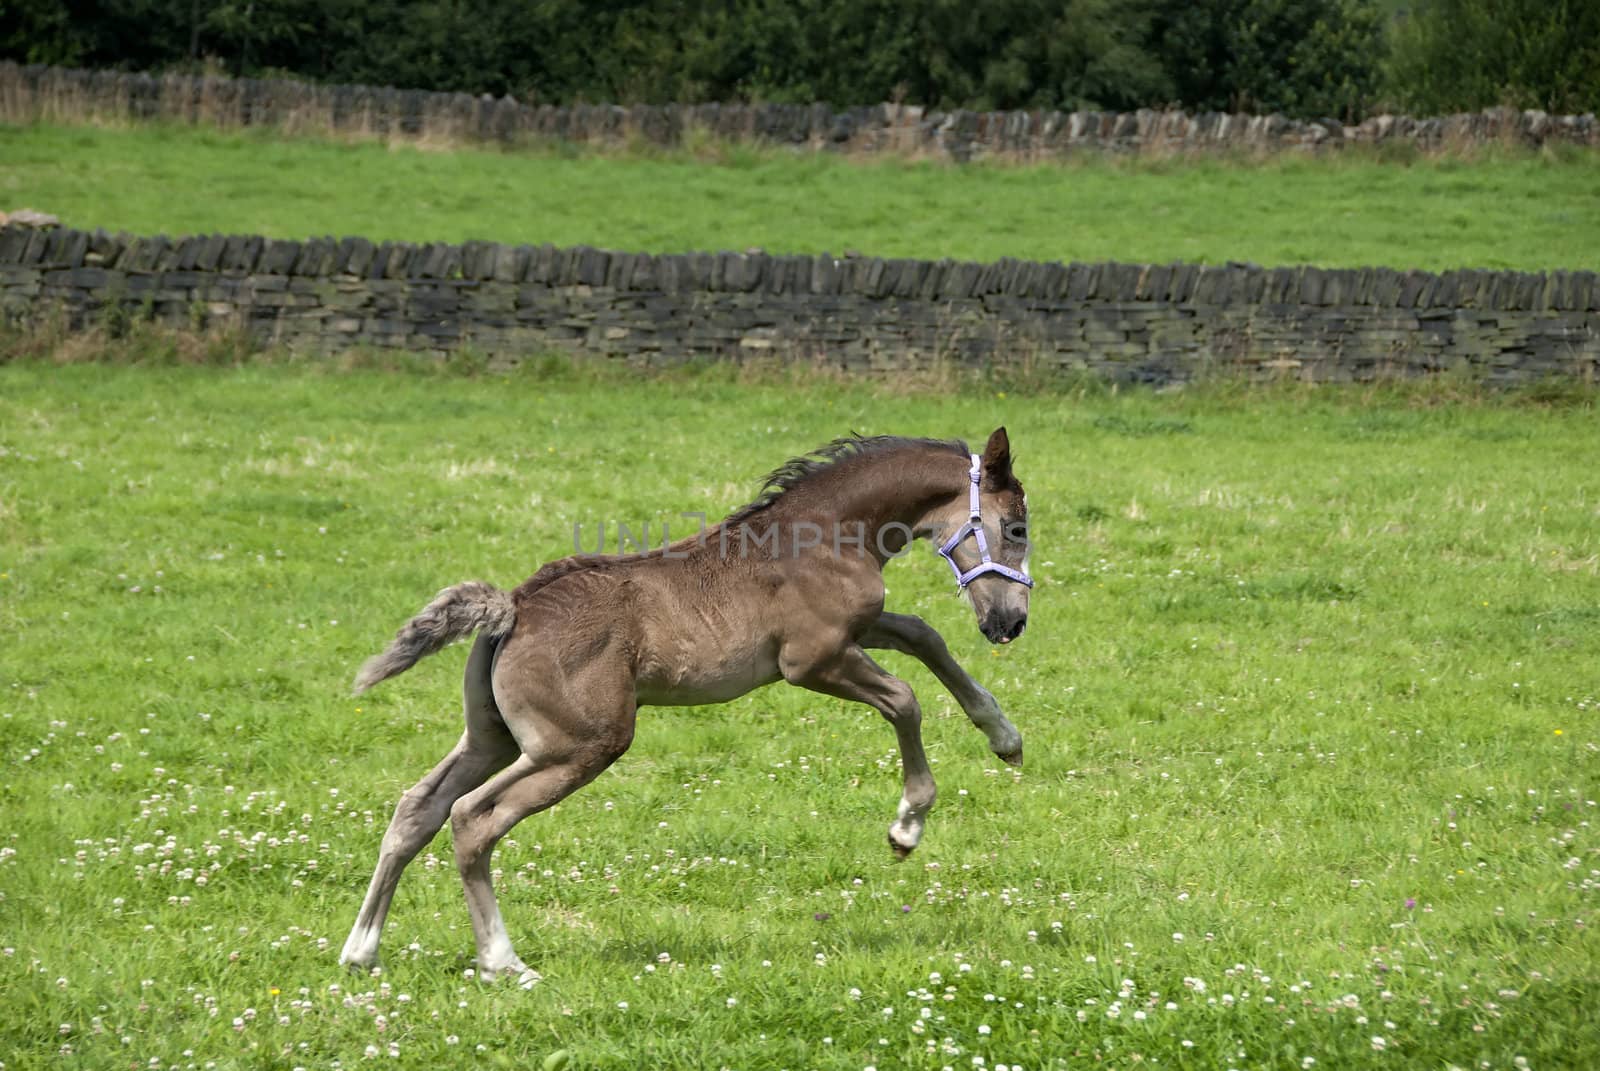 A Four Week old Foal prancing in a moorland field in Yorkshire